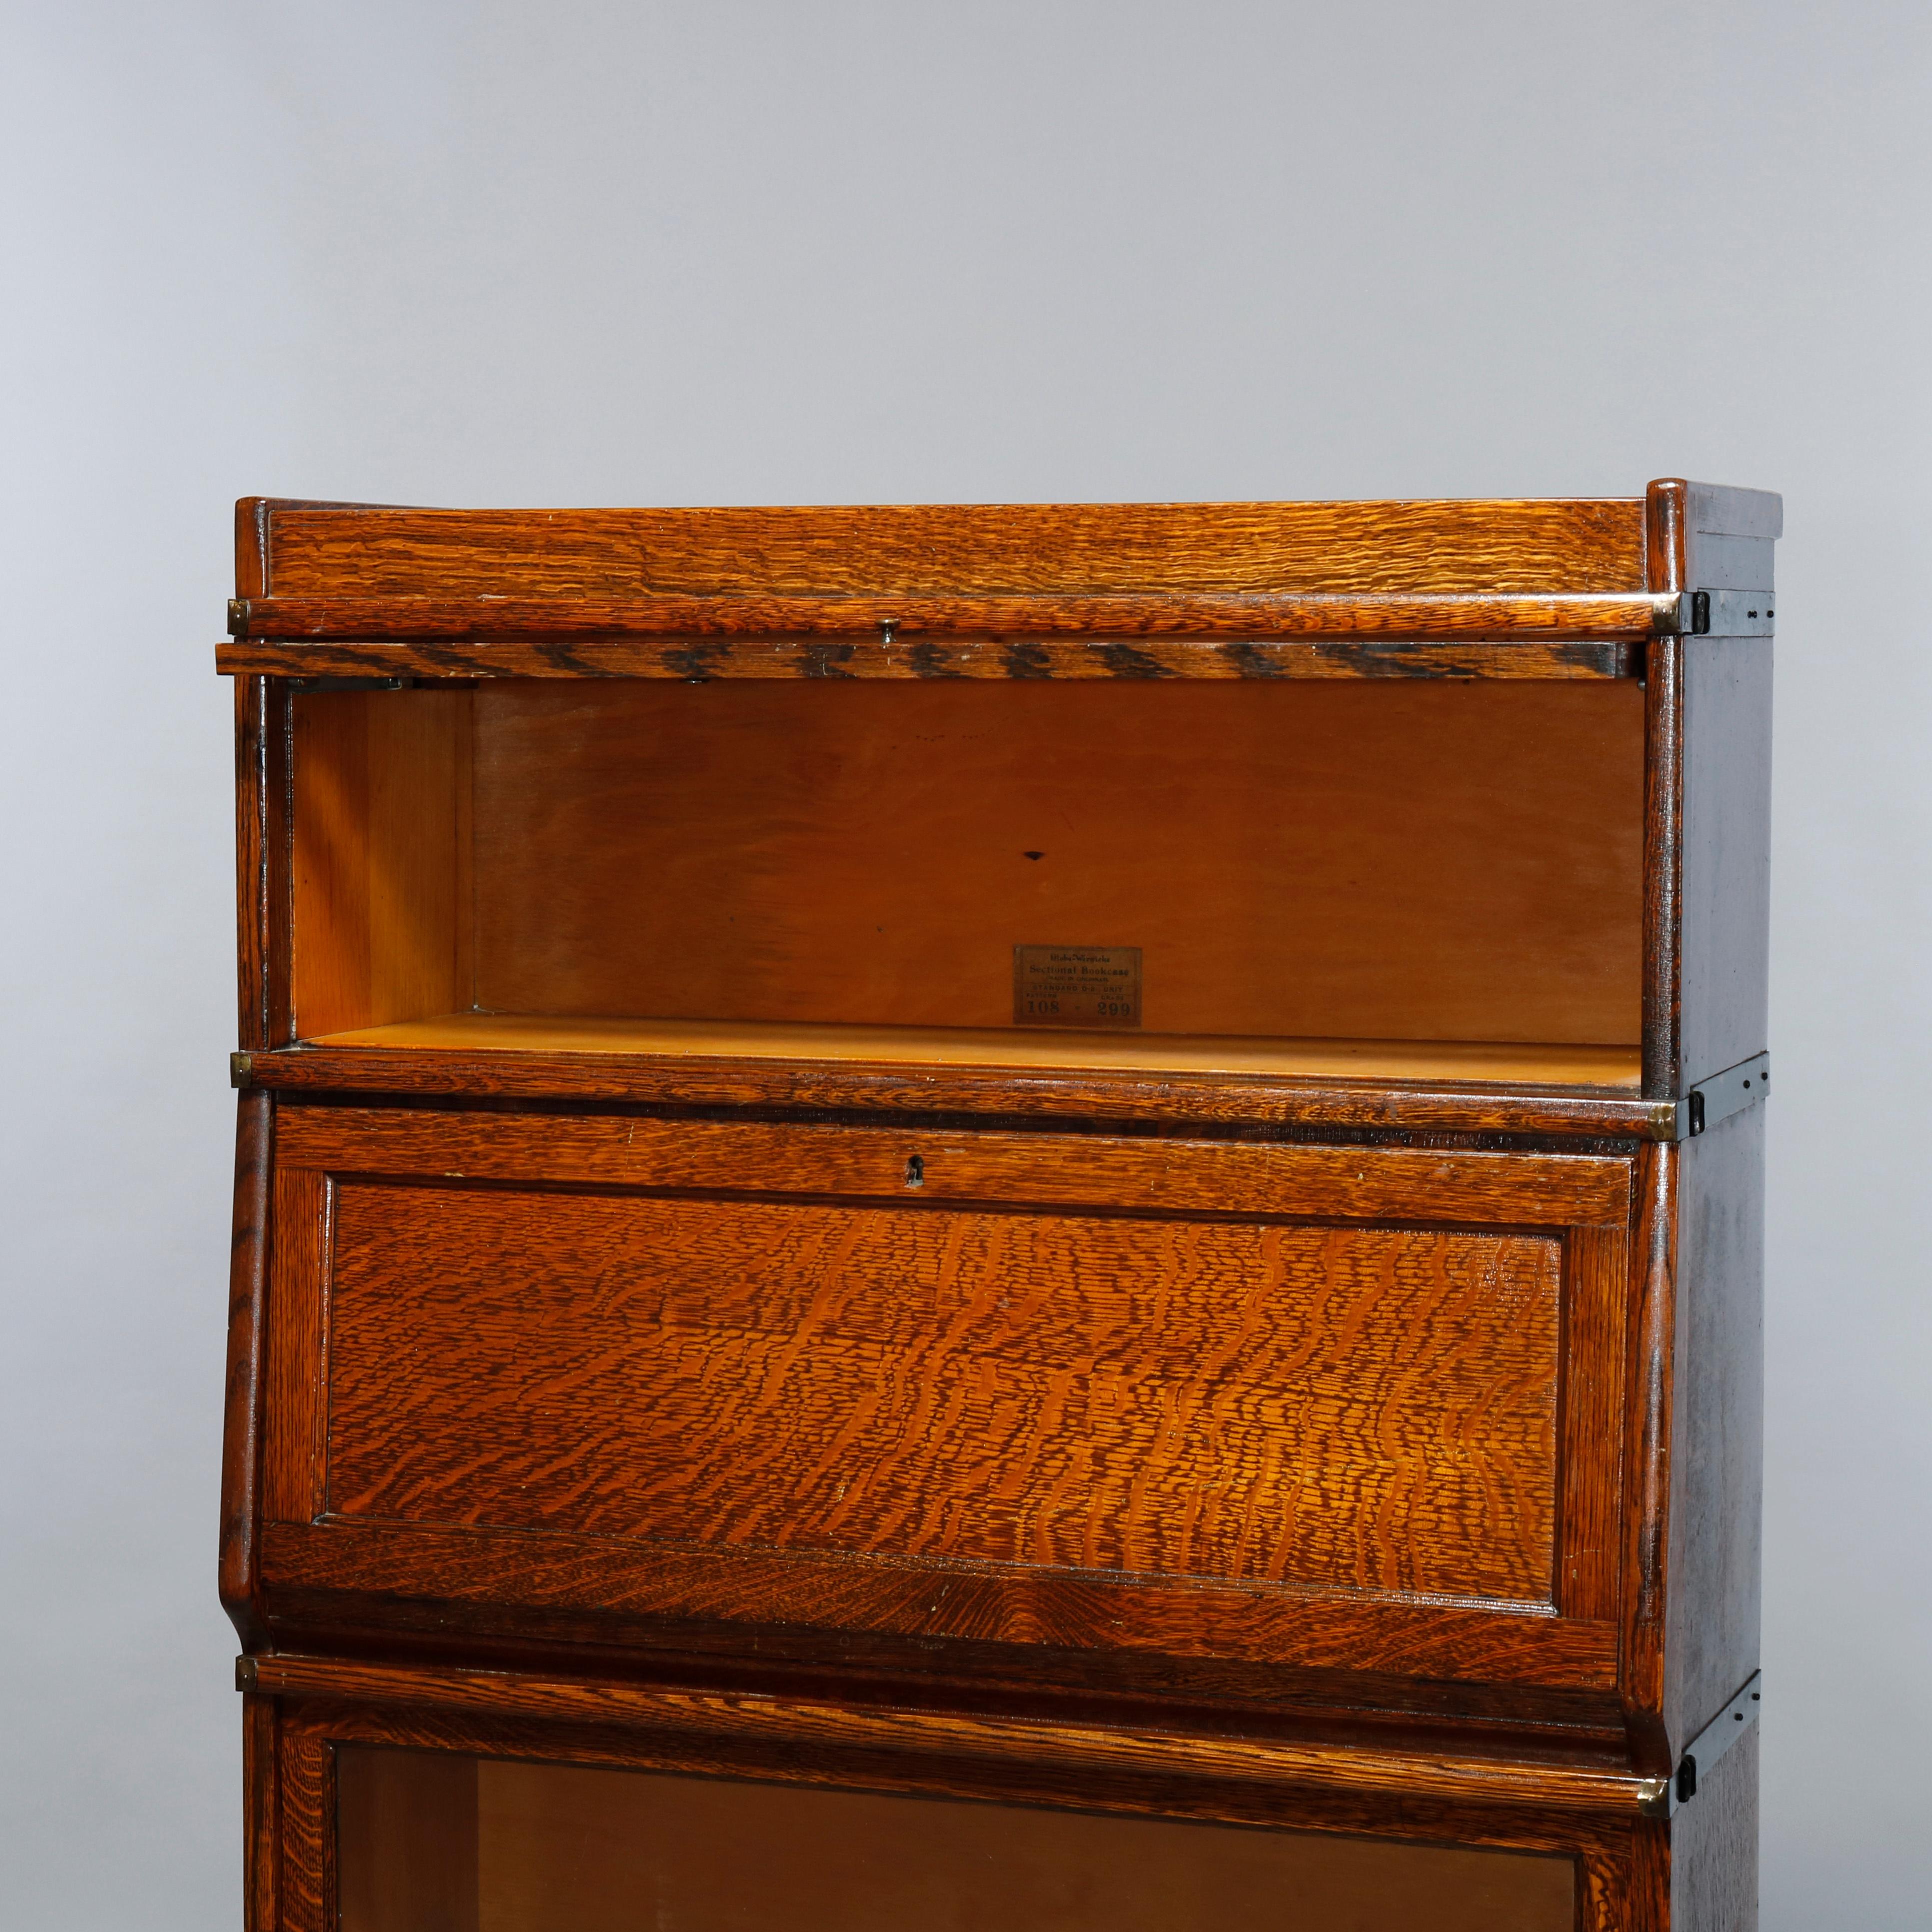 An antique Arts and Crafts secretary by Globe Wernicke offers oak construction with barrister cases having glass doors and drop front desk, original labels as photographed, circa 1890 

Measures: 60 